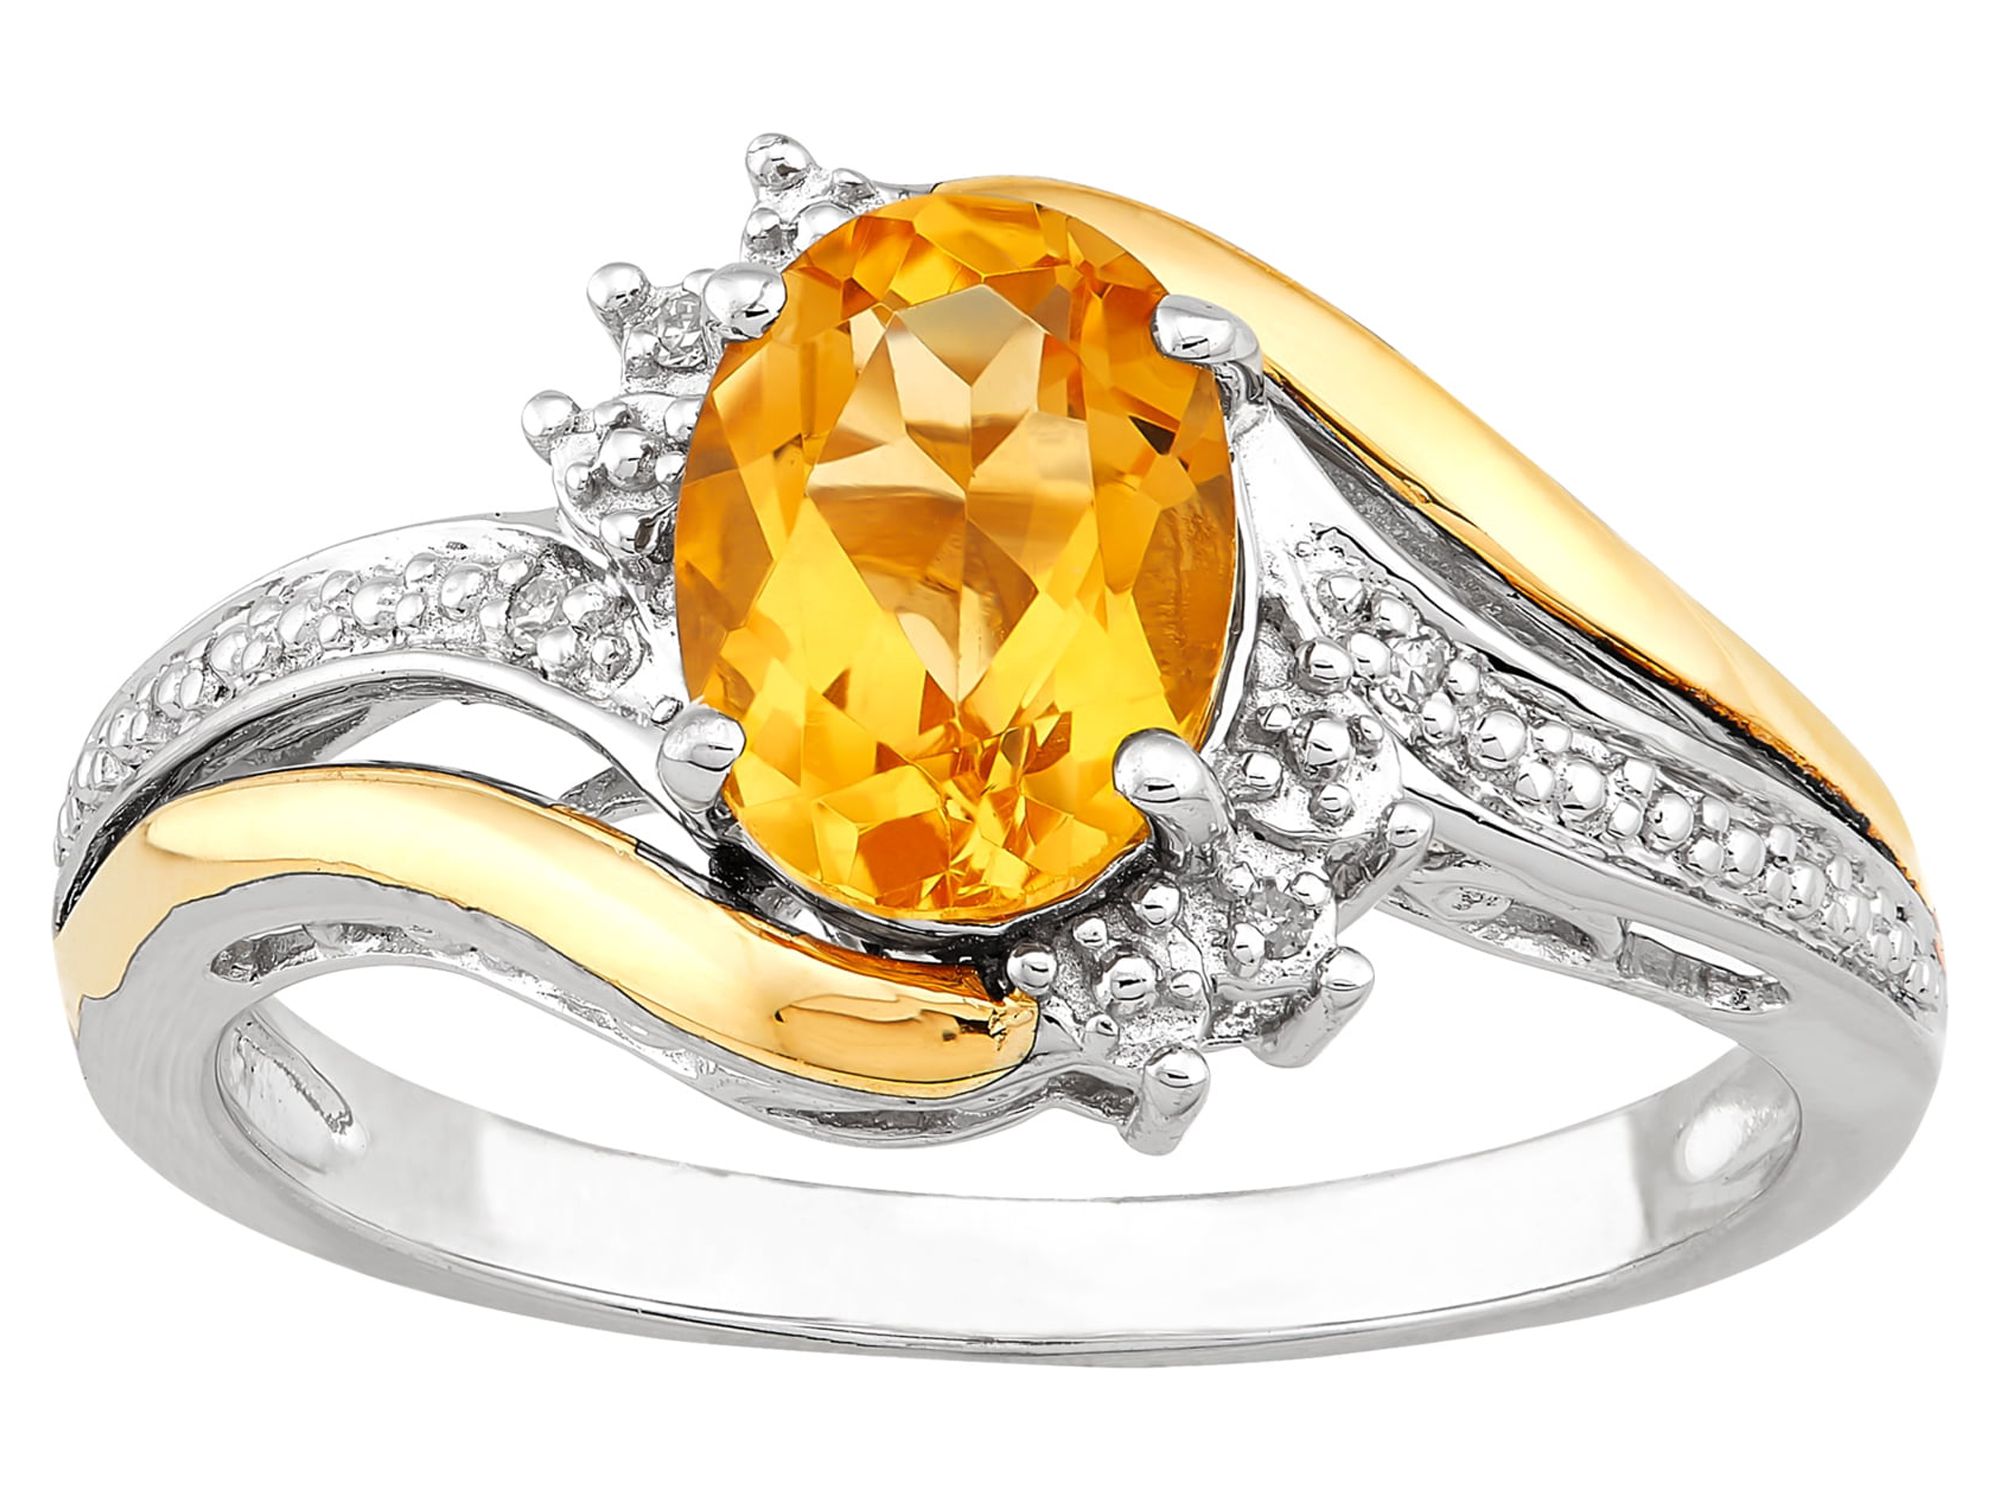 Brilliance Fine Jewelry Genuine Citrine Diamond Accent Ring in Sterling Silver and 10K Yellow Gold - image 1 of 4